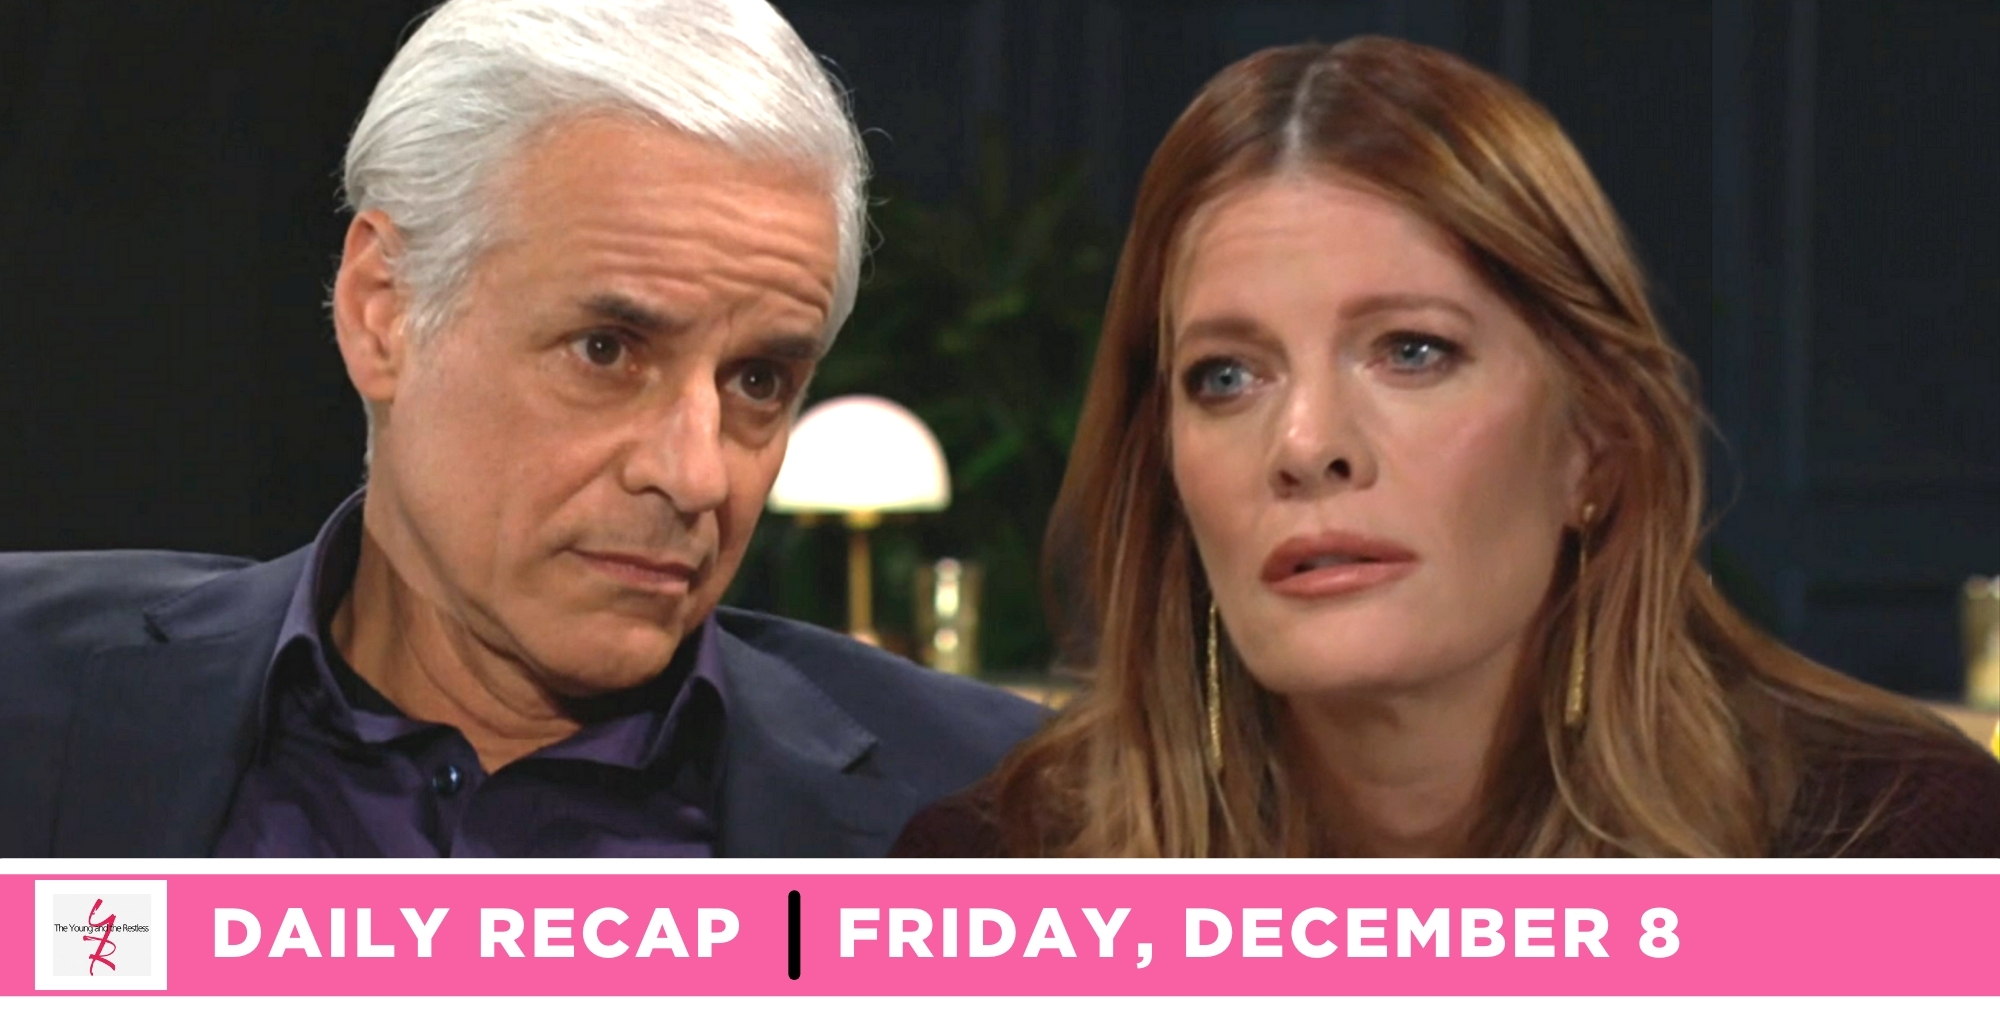 the young and the restless recap for december 8, episode 12762, have michael and phyllis have a deep talk.